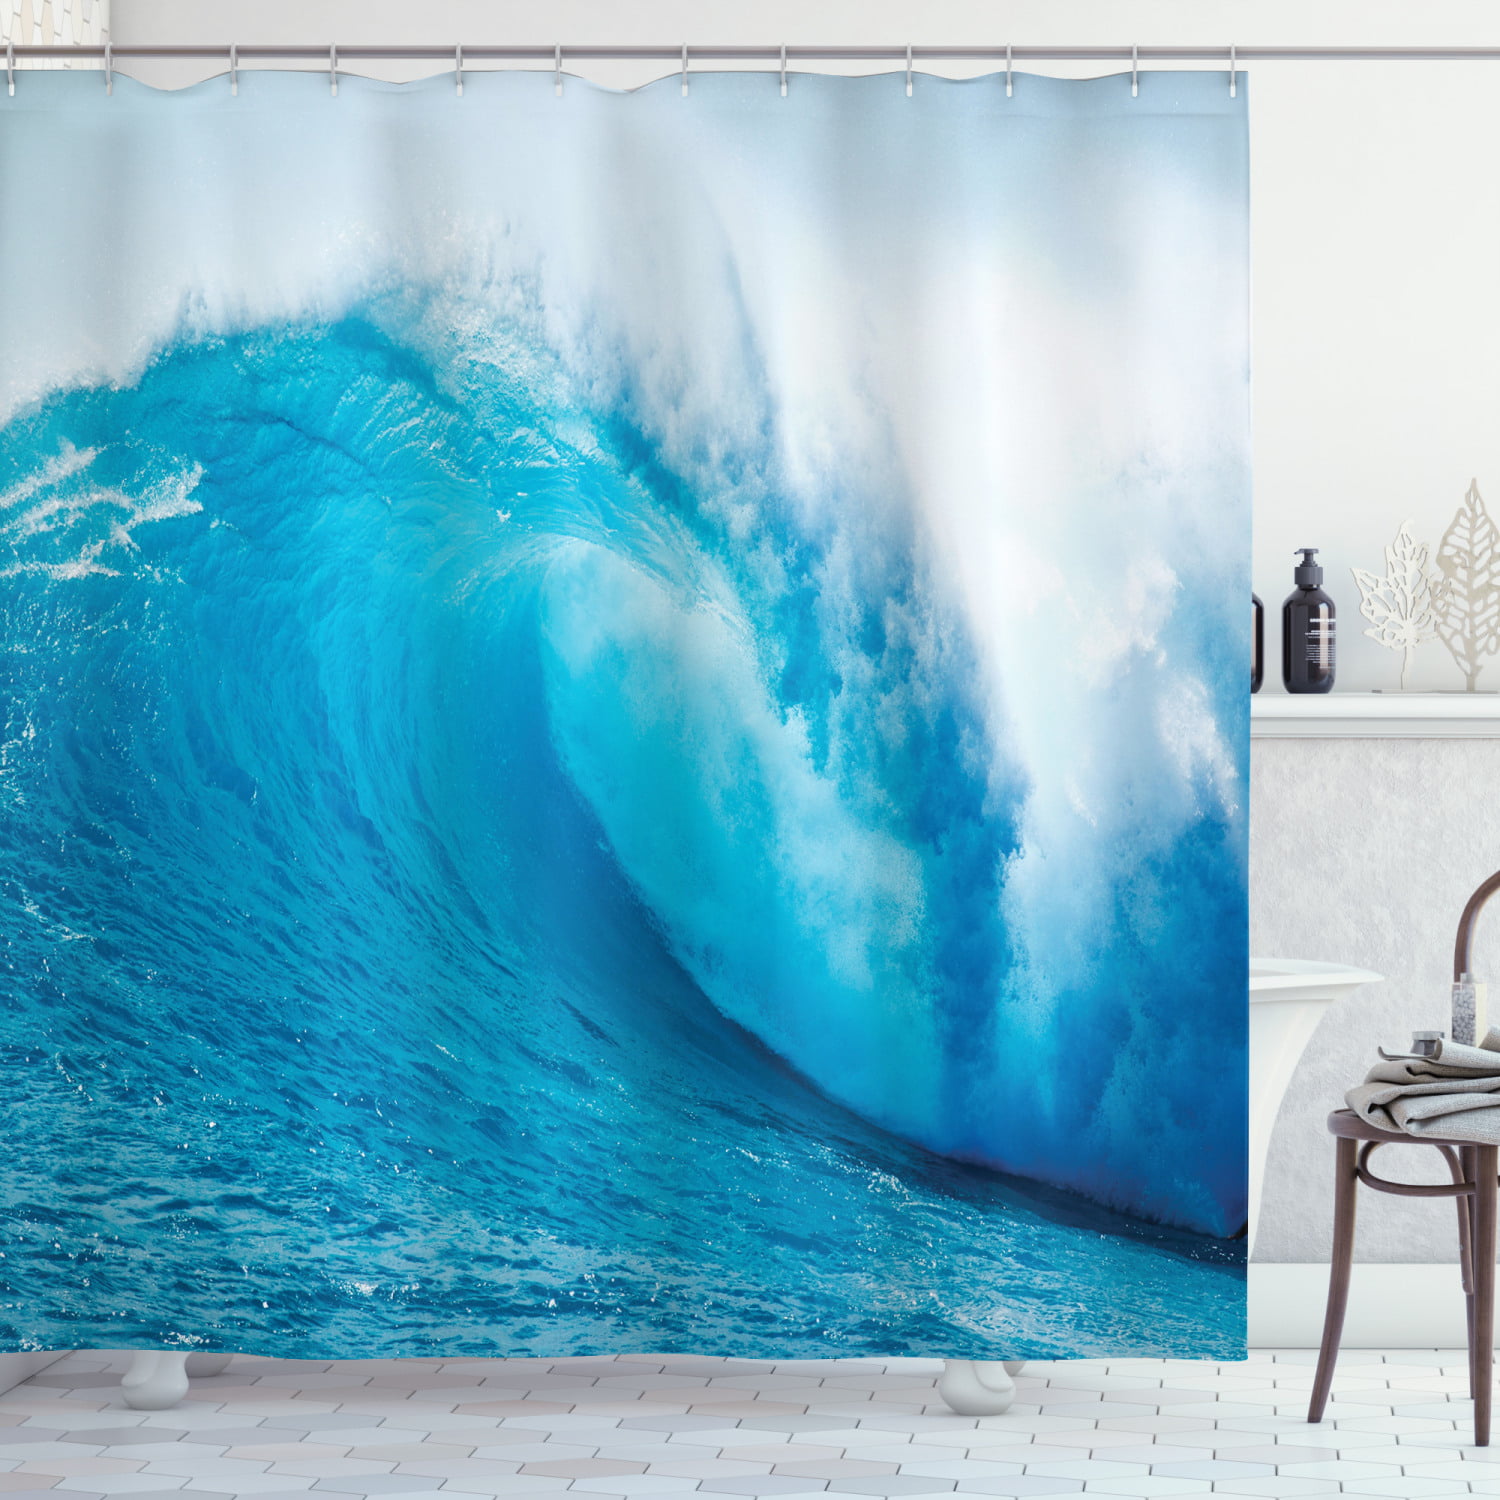 Surfboards Extreme Water Sport Lifestyle Print Beach Theme Shower Curtain Set 